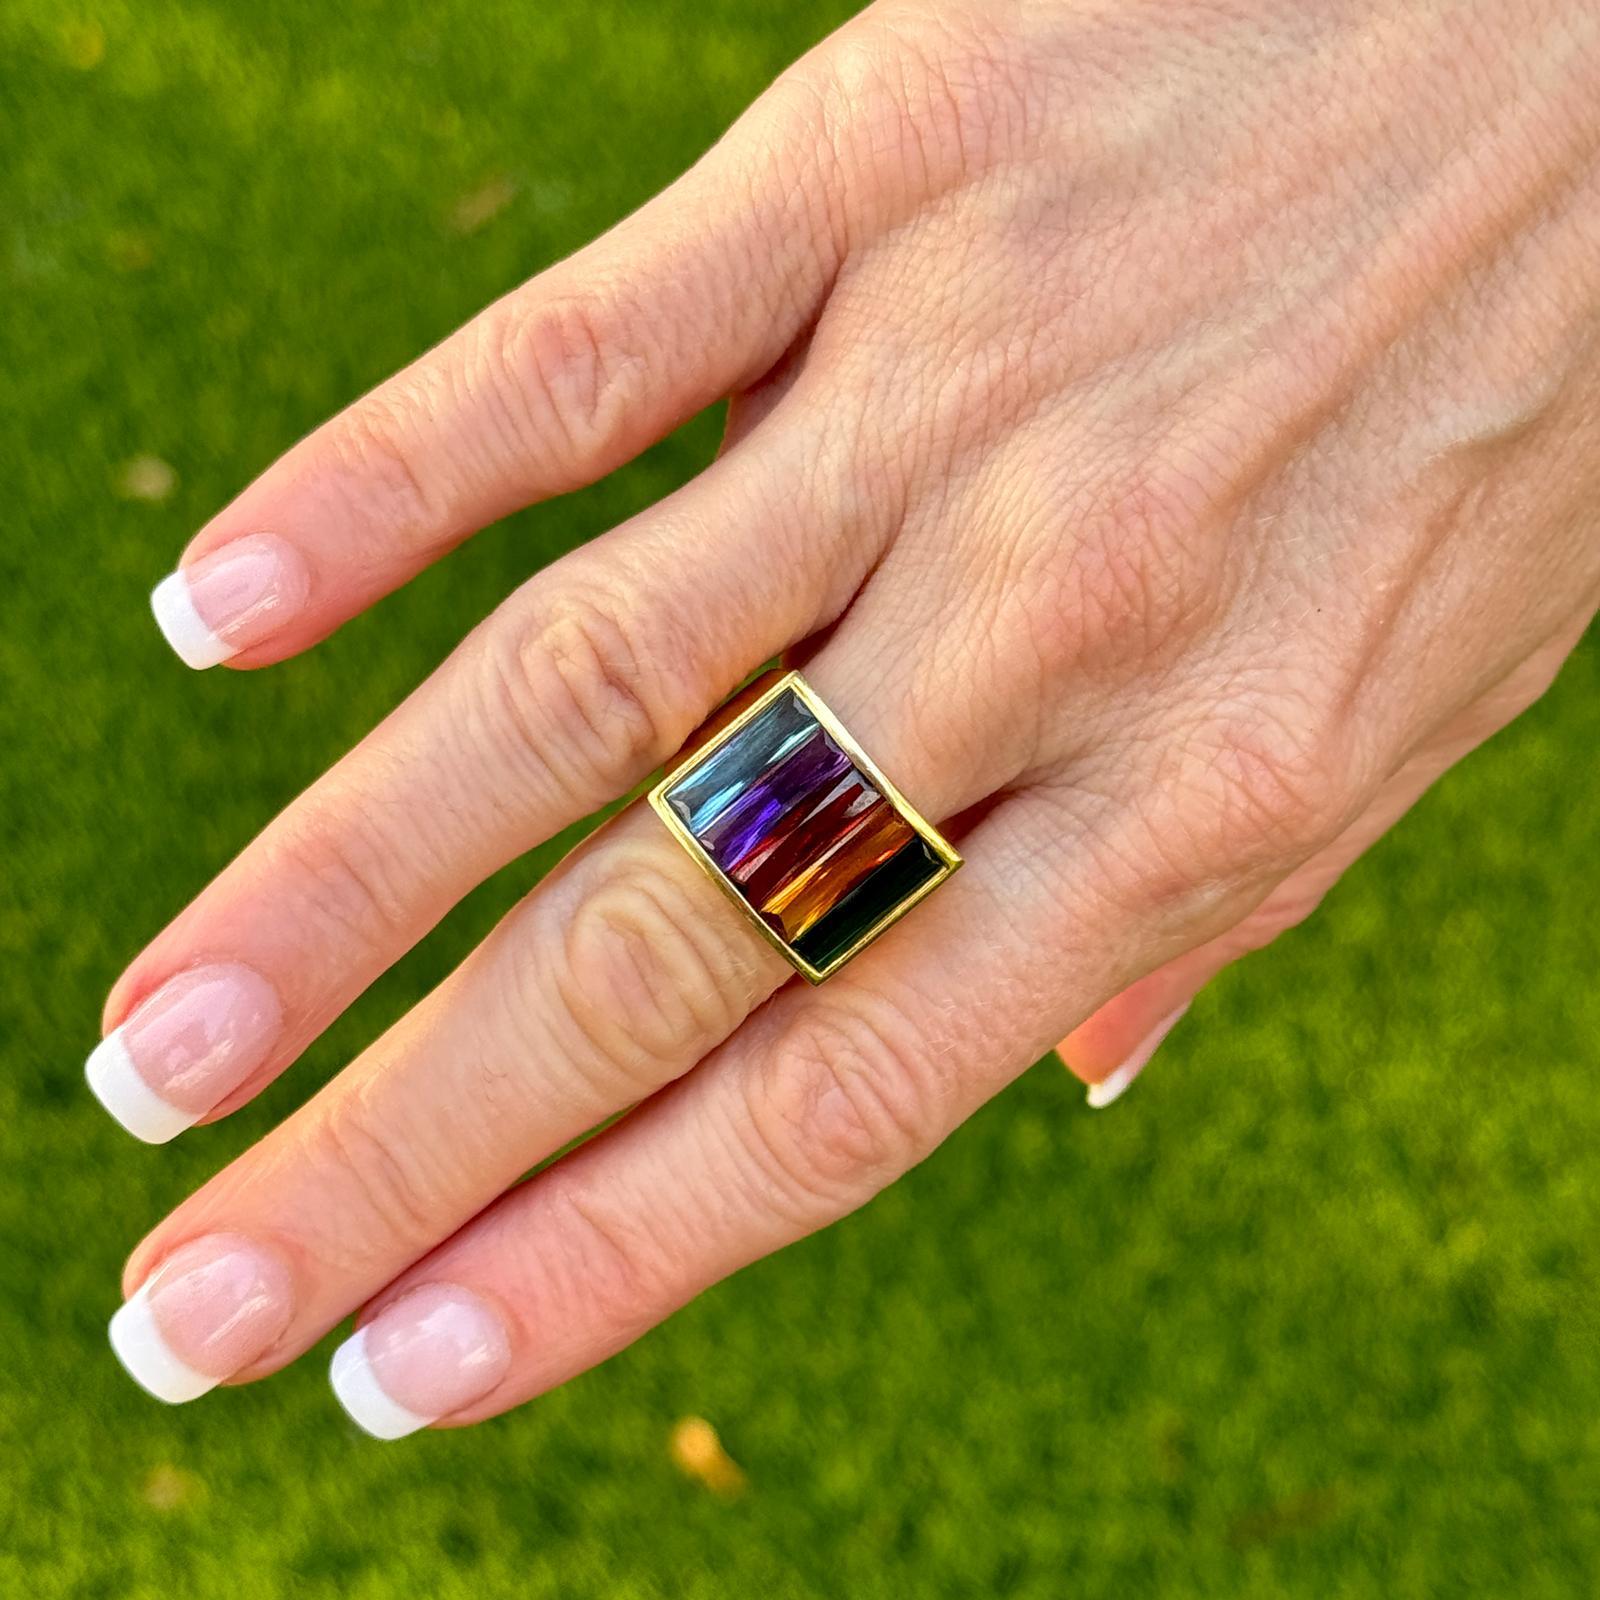 Multi-Color gemstone vintage band ring crafted in 18 karat yellow gold. The band features baguette cut multi-color tourmaline, citrine, and amethyst gemstones in a rainbow design. The ring measures 15 x 20mm on top and is currently size 7 (can be